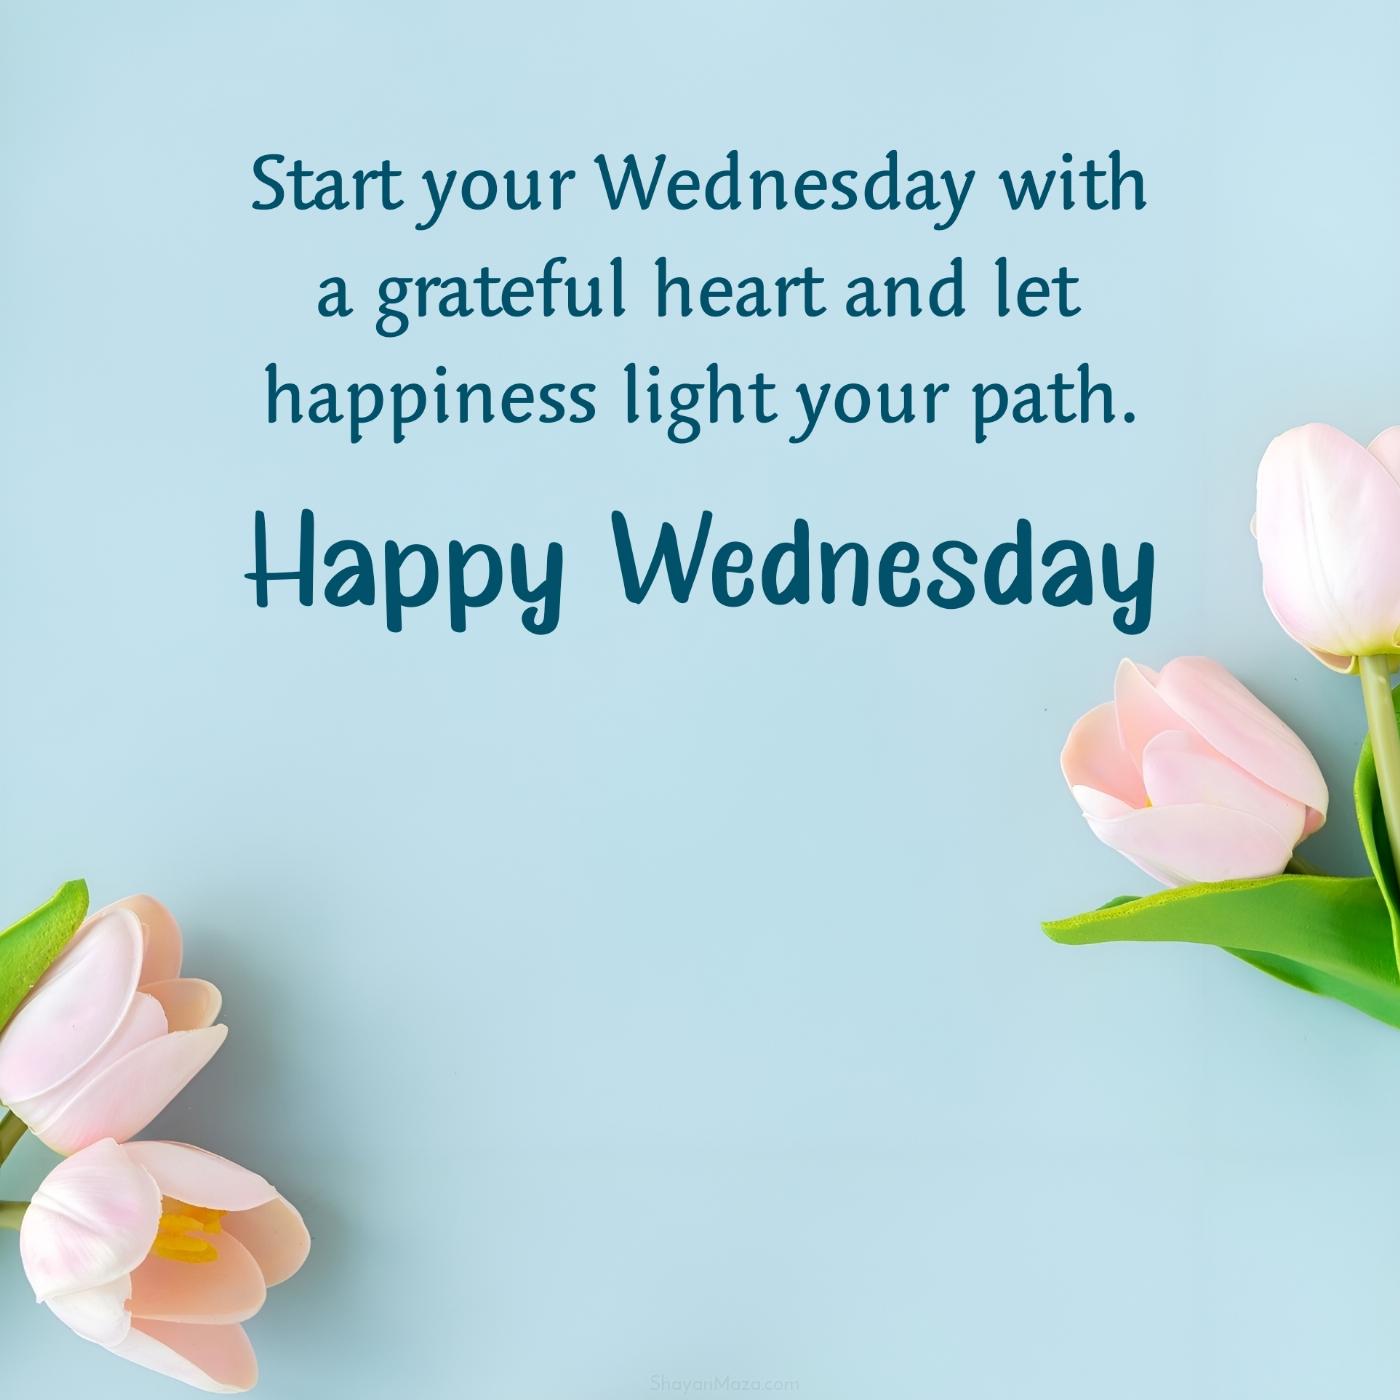 Start your Wednesday with a grateful heart